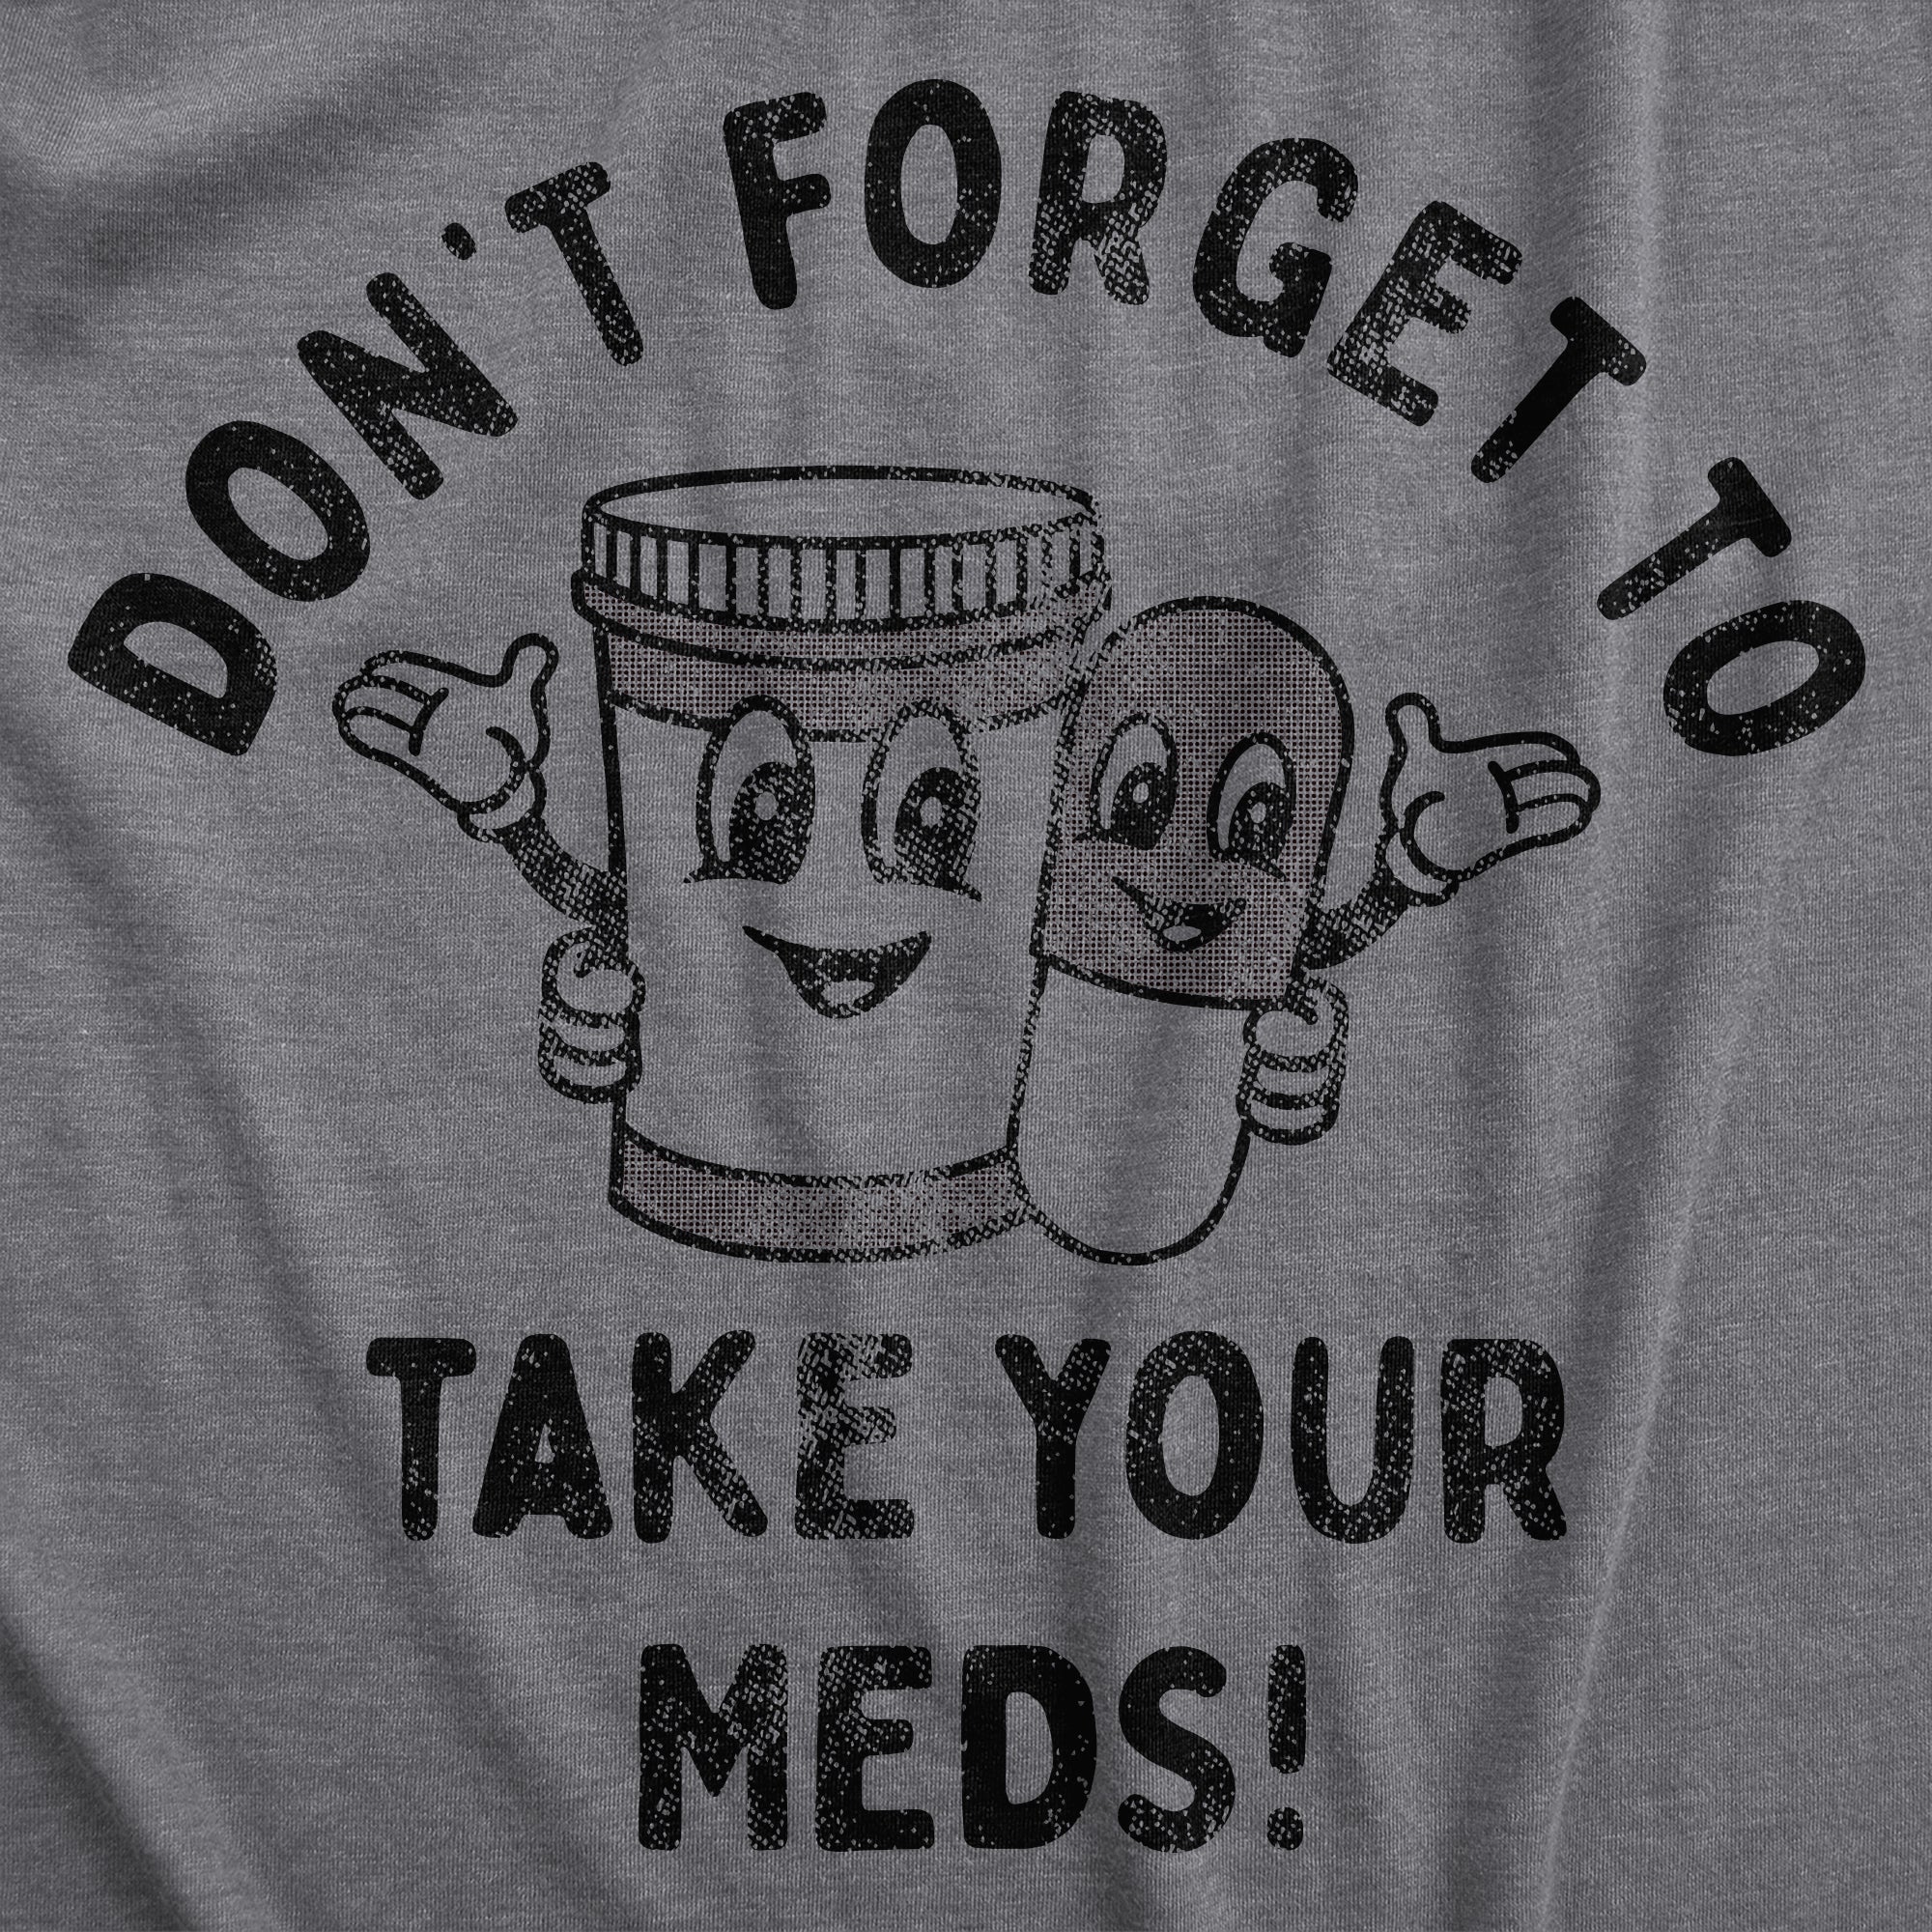 Funny Dark Heather Grey - MEDS Dont Forget To Take Your Meds Mens T Shirt Nerdy Sarcastic Tee